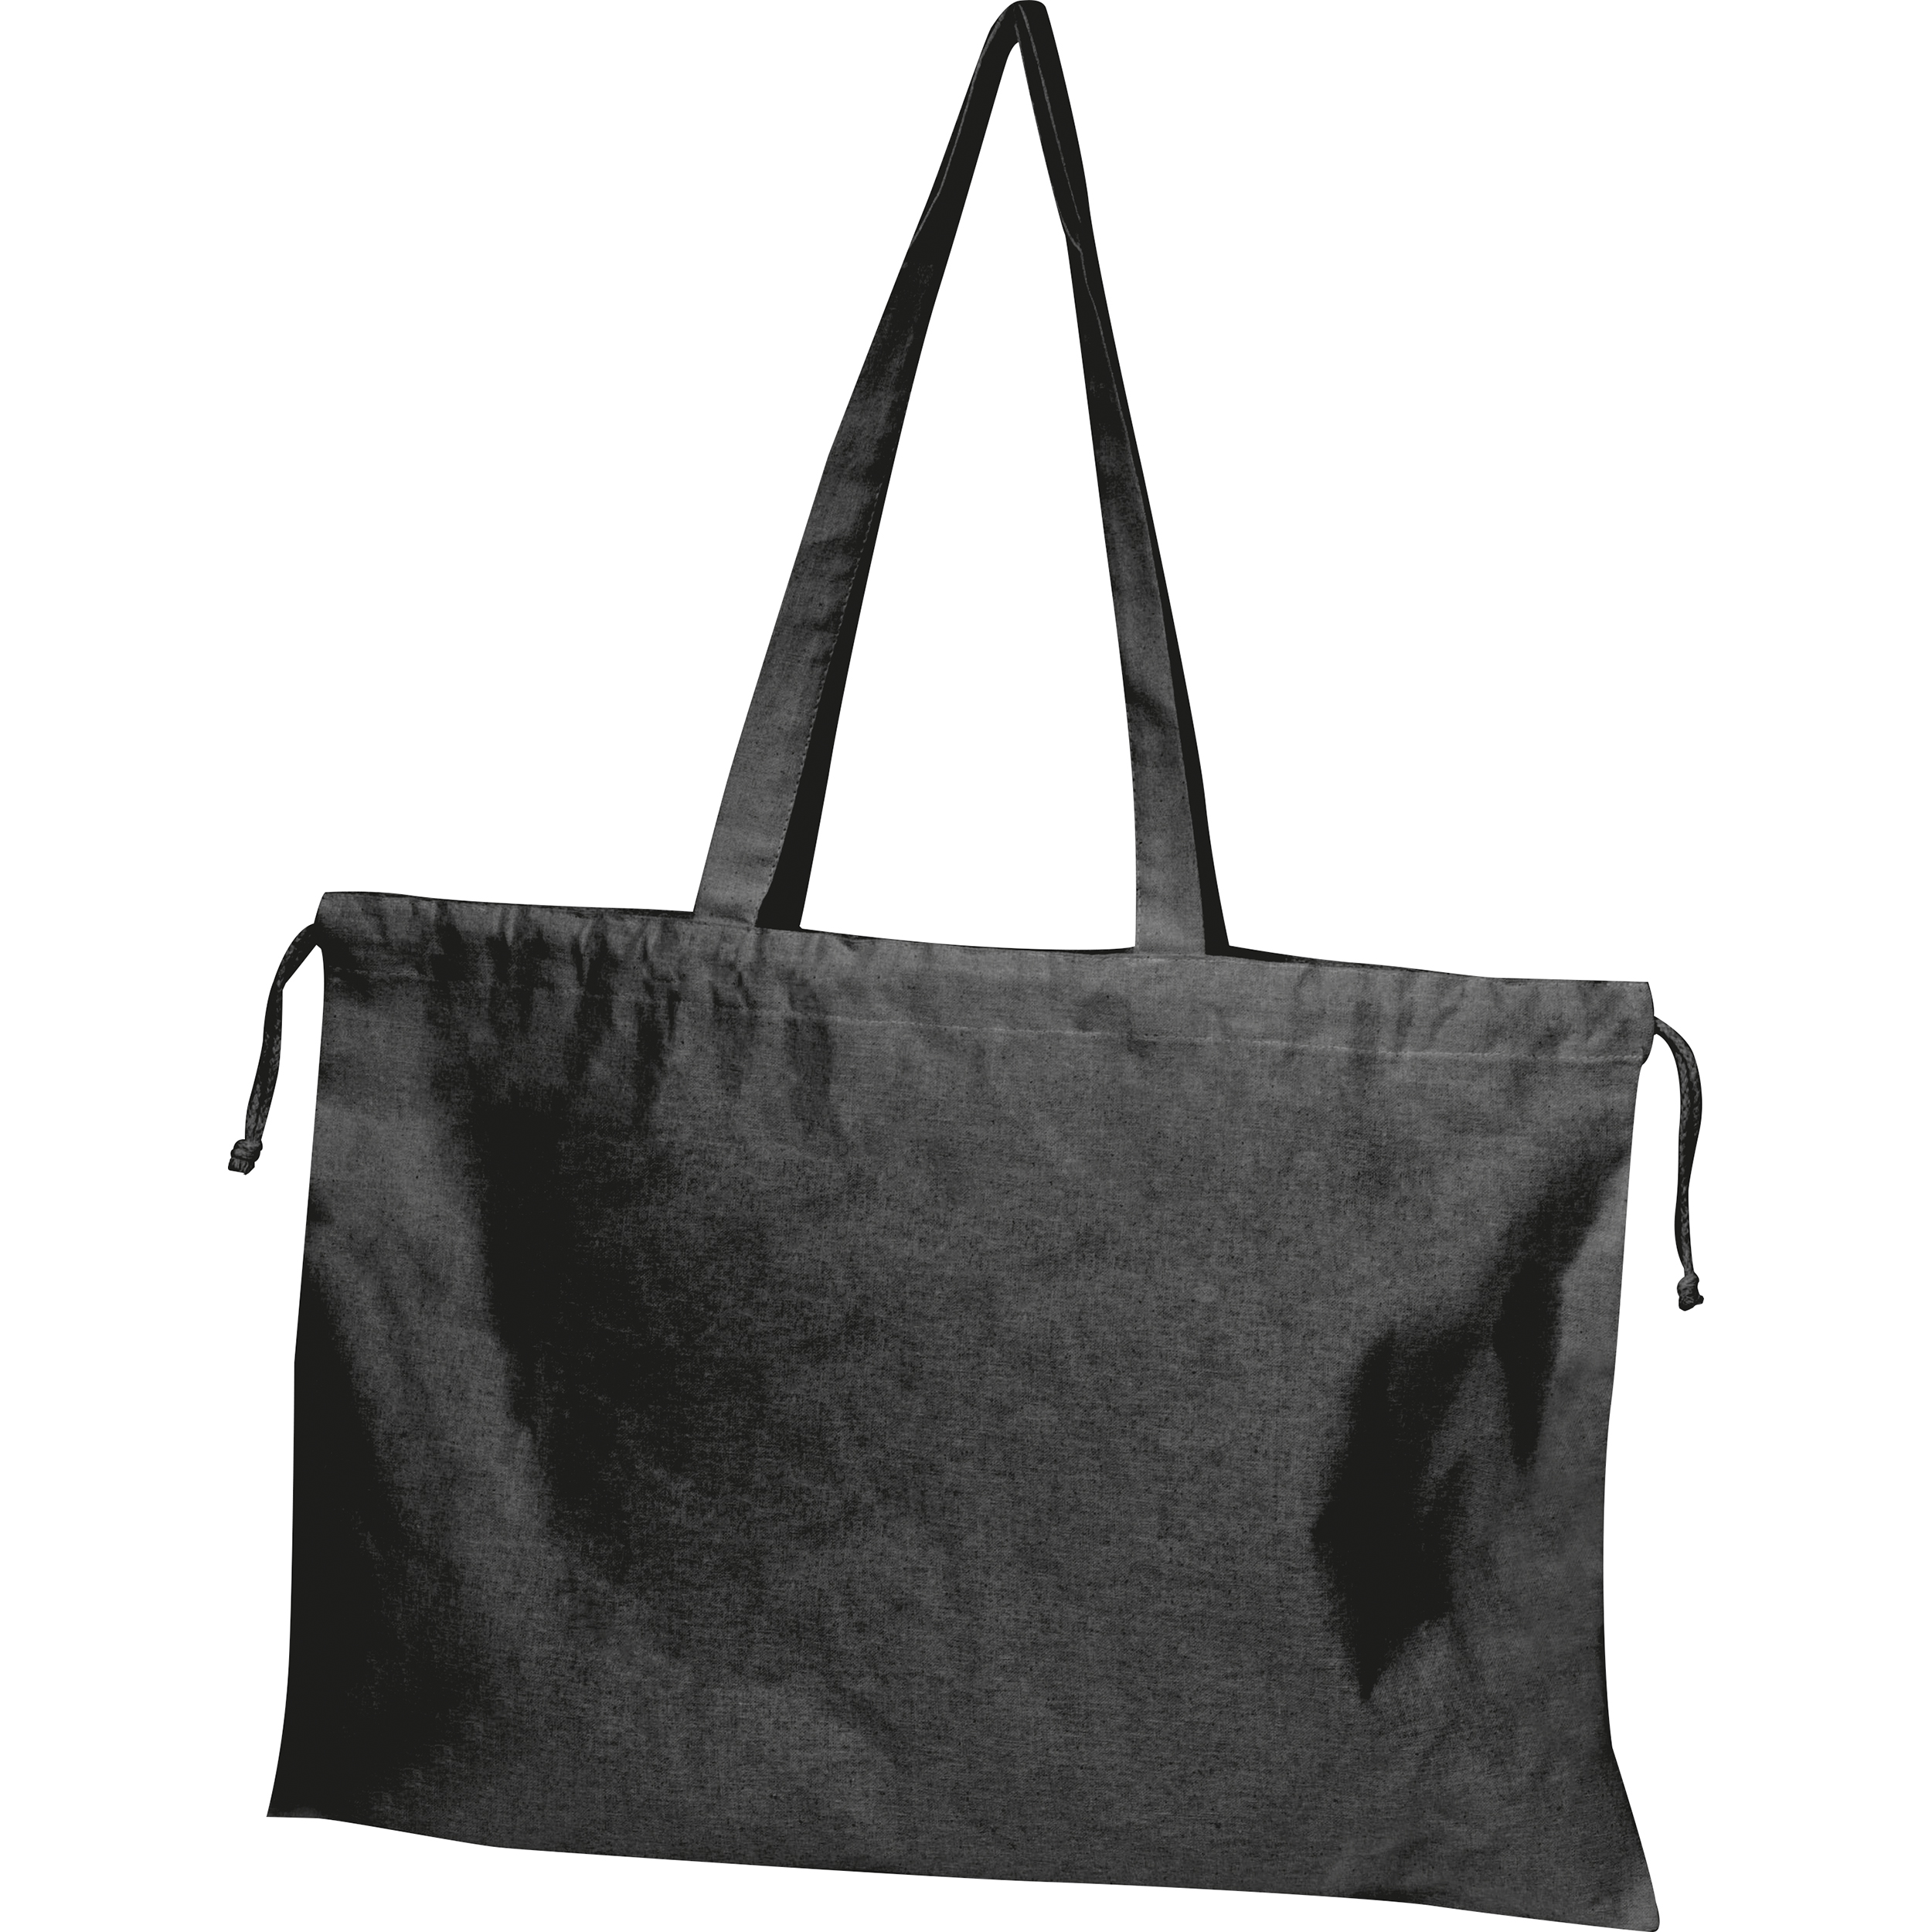 Drawstring Bag made from GOTS Certified Organic Cotton - Caldy